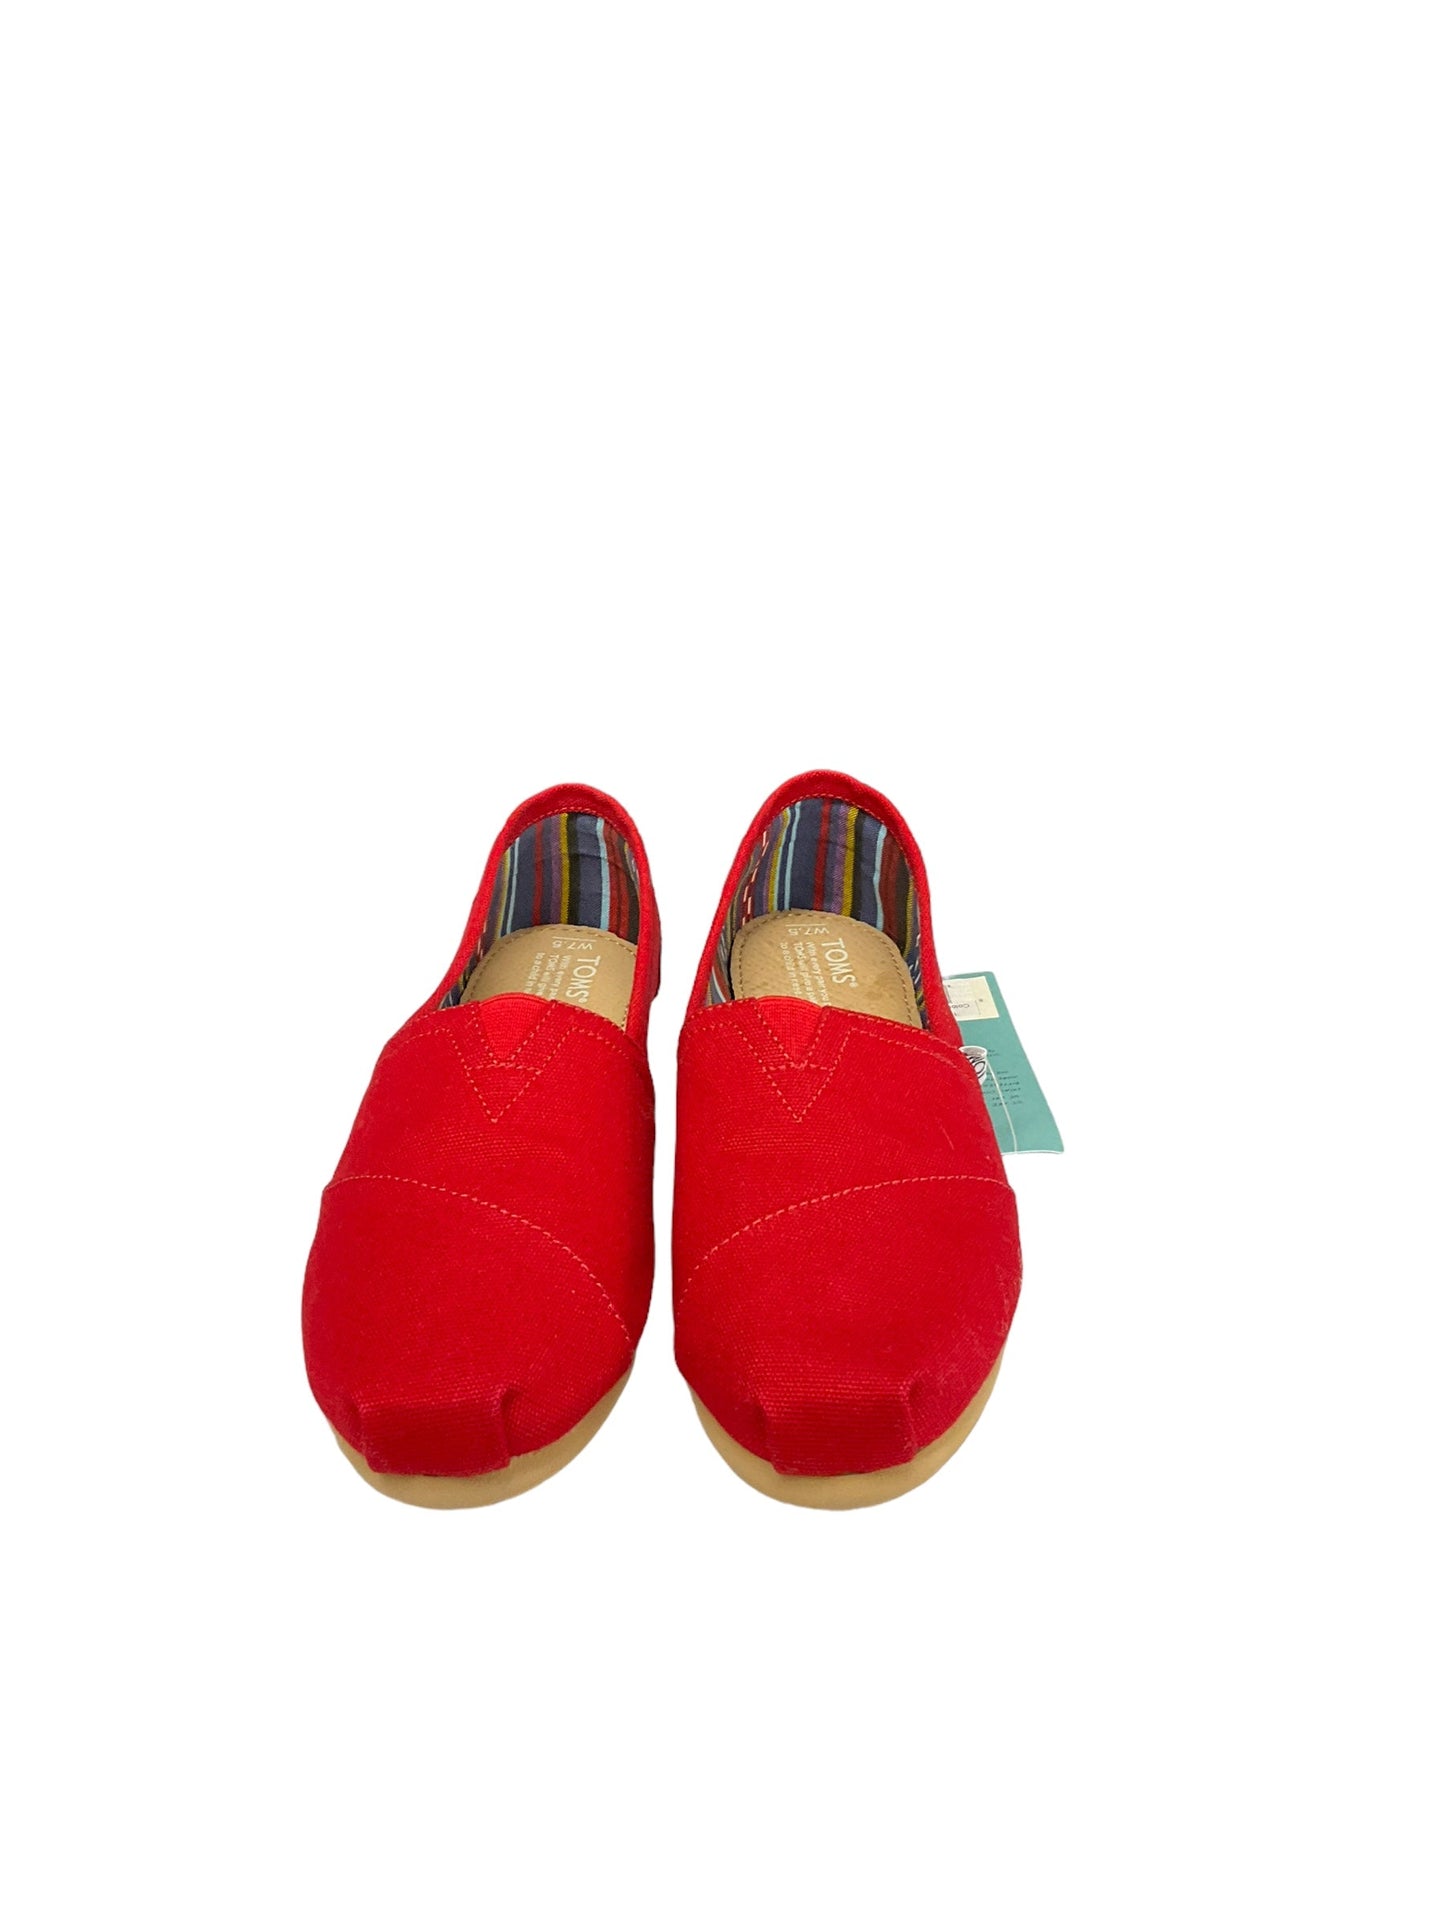 Red Shoes Flats Toms, Size 7.5